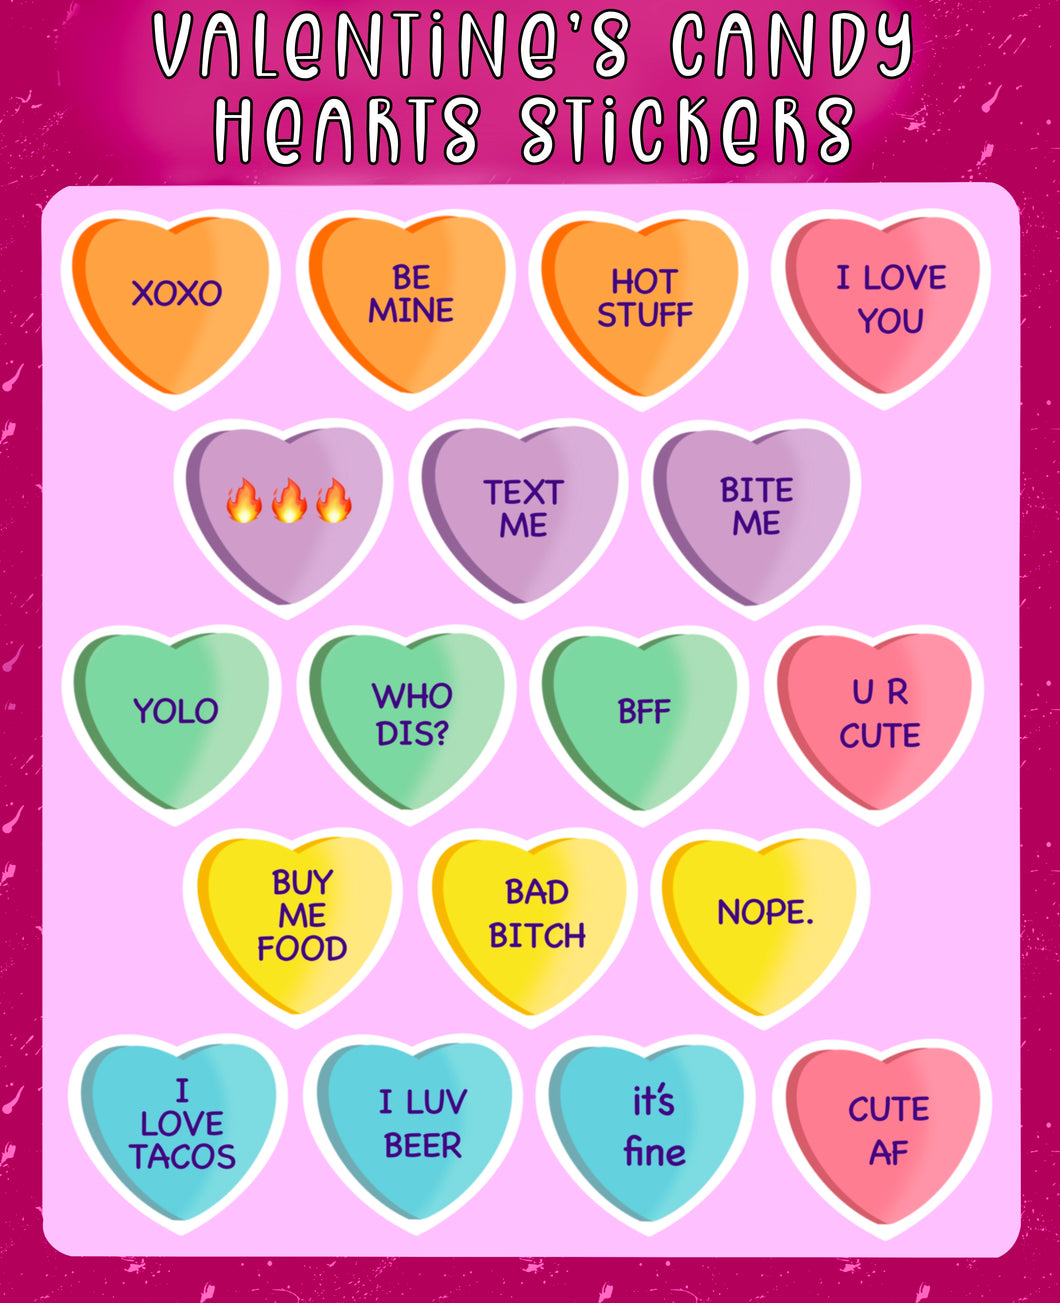 Valentine's Day Candy Convo Hearts stickers